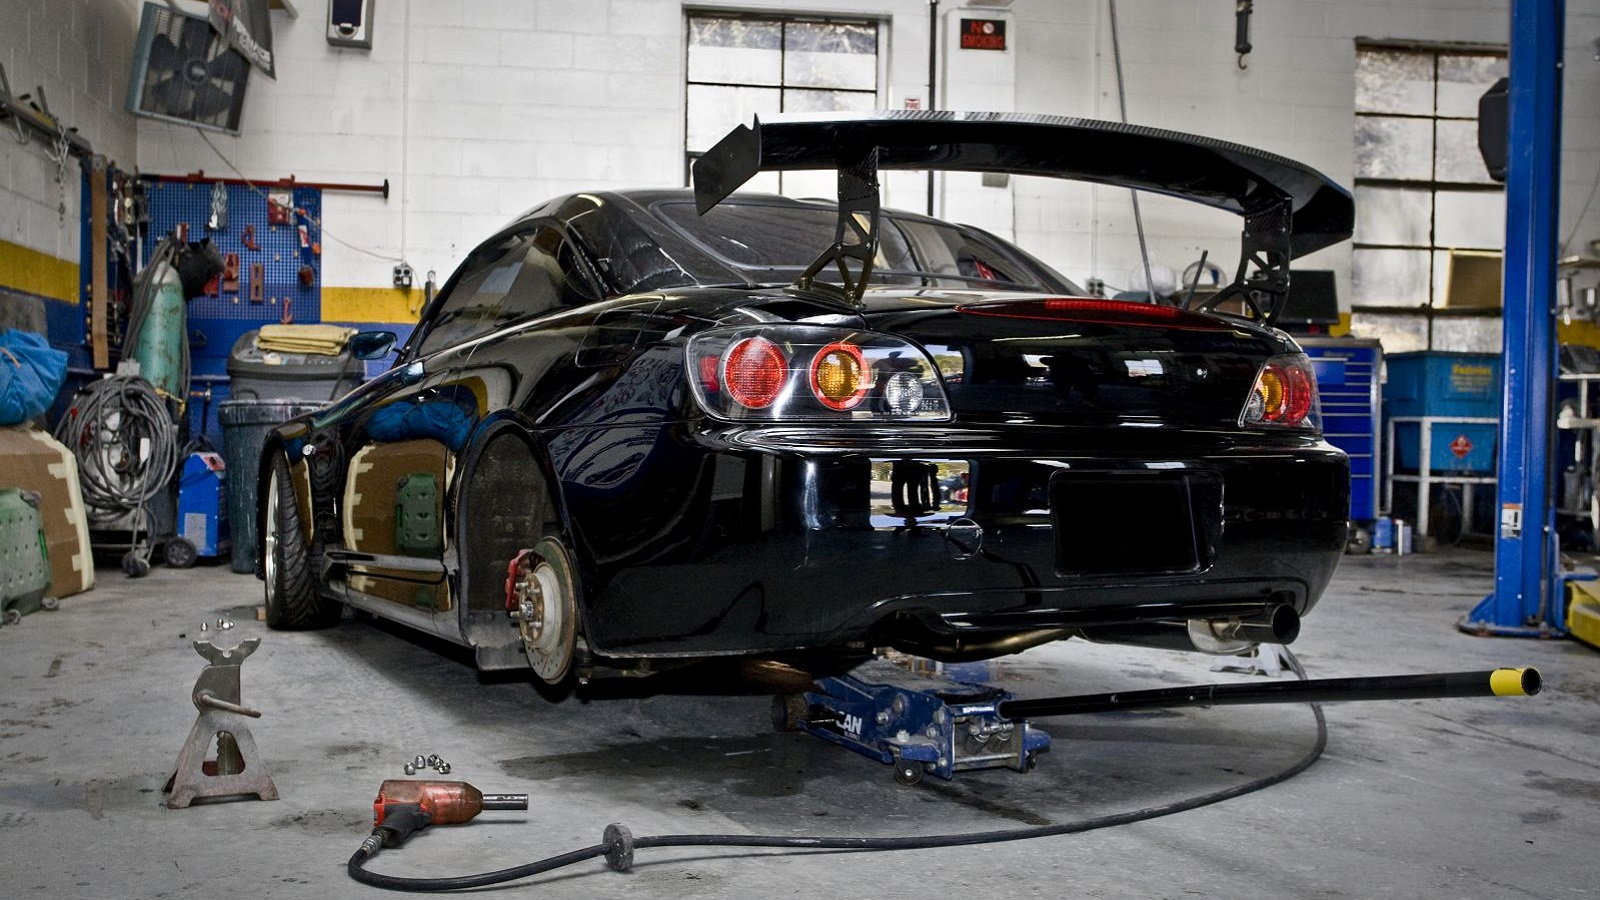 Daily Slideshow: Honda S2000: To Wing or Not to Wing? | S2ki